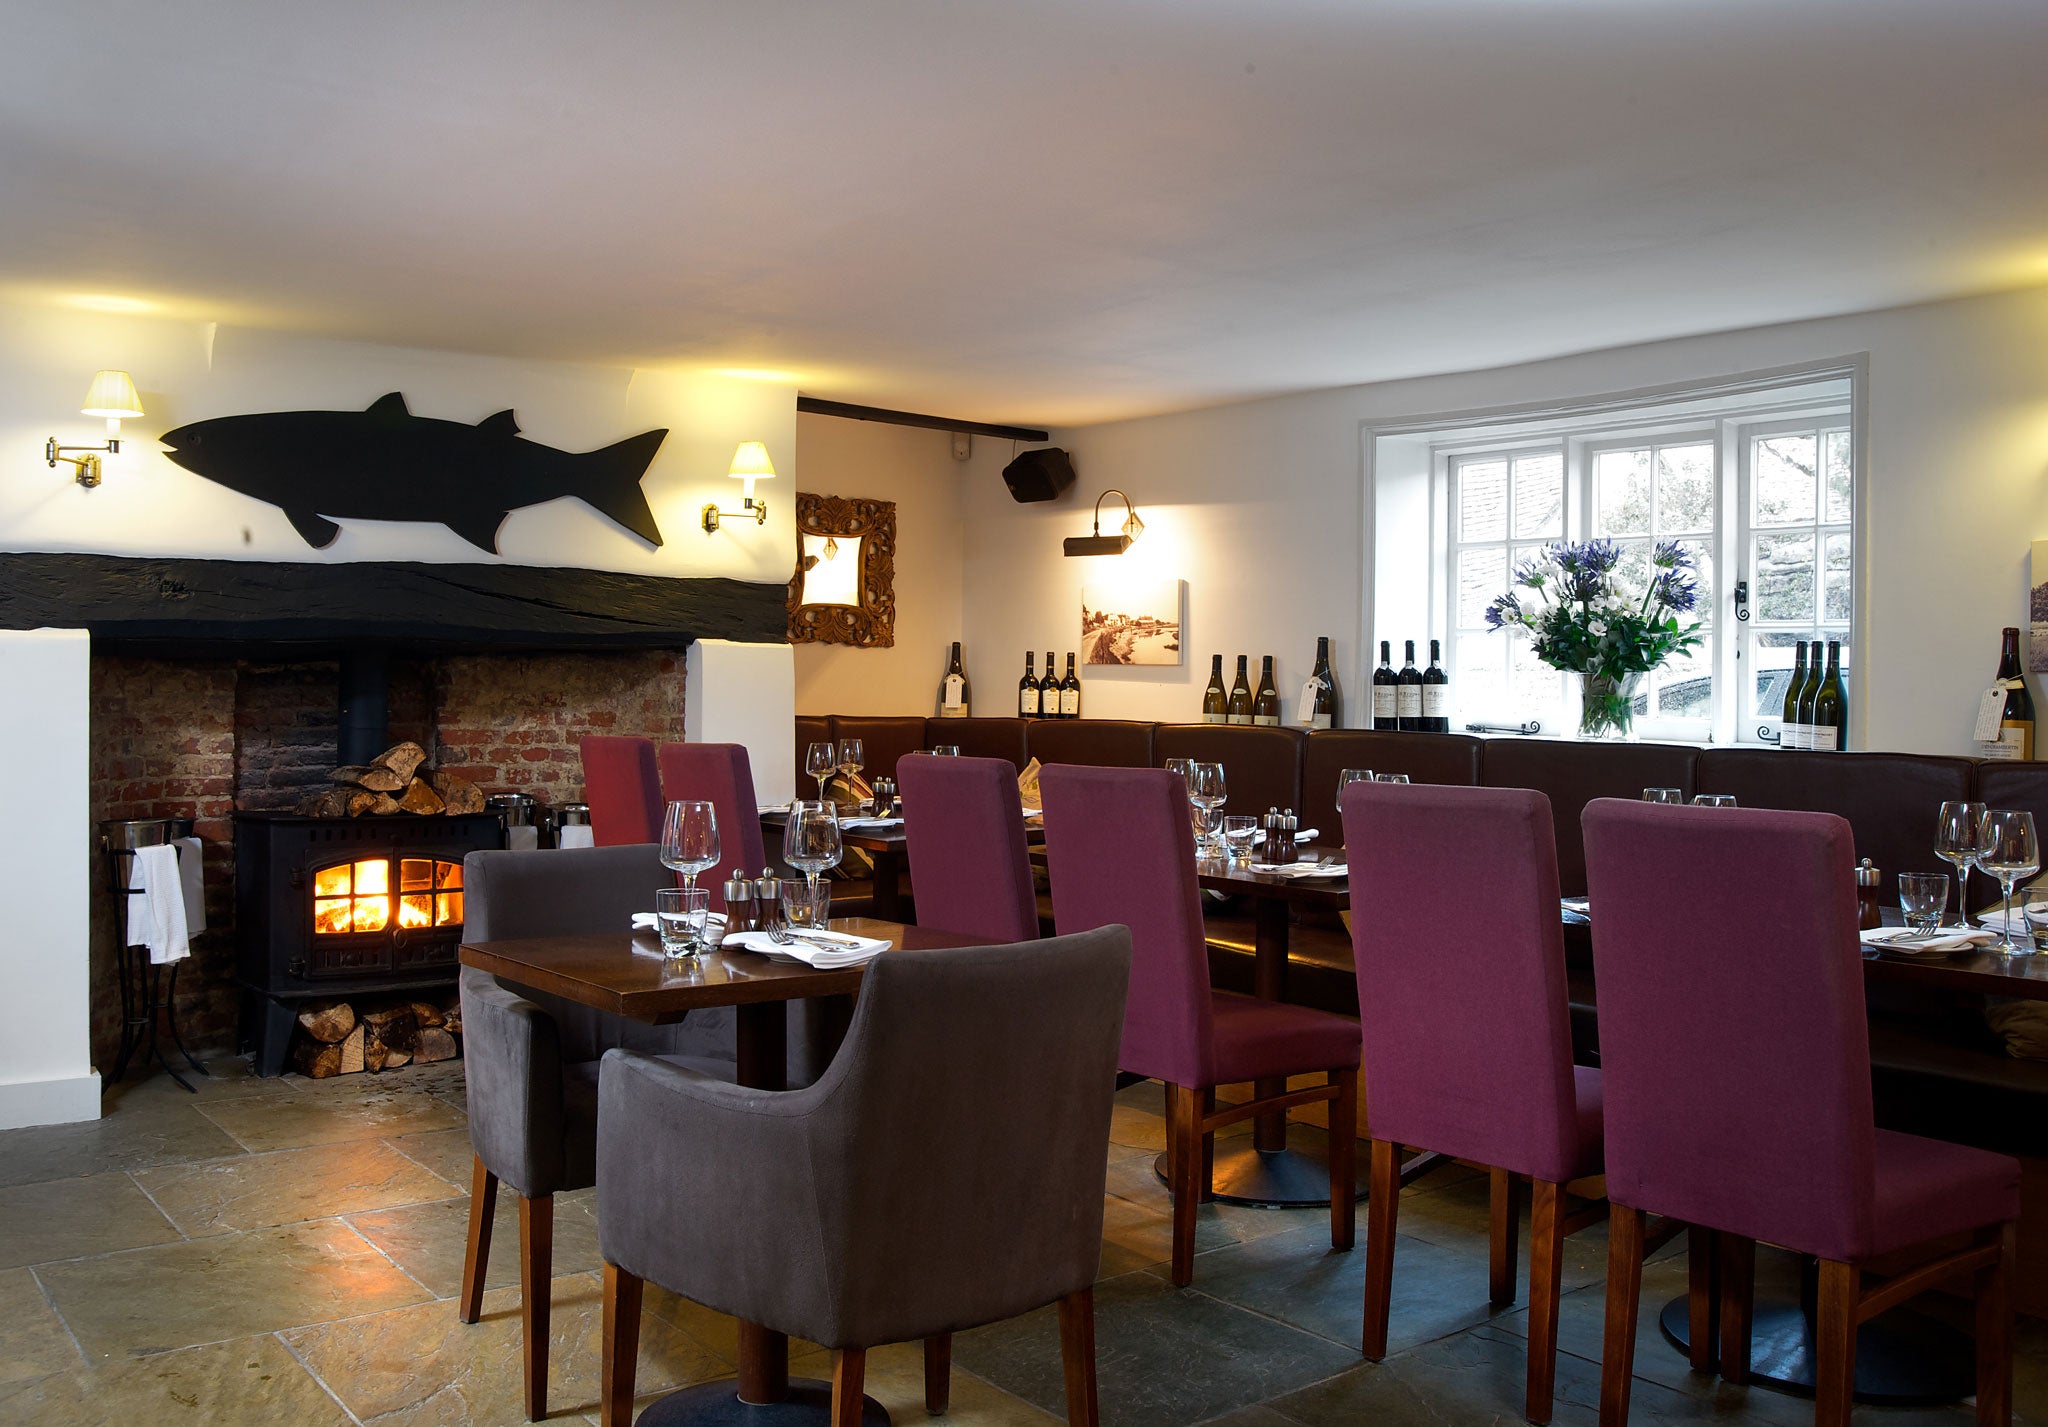 Vision of loveliness: The Crab & Lobster was an inn in the 17th century and has been renovated to the tune of £3m